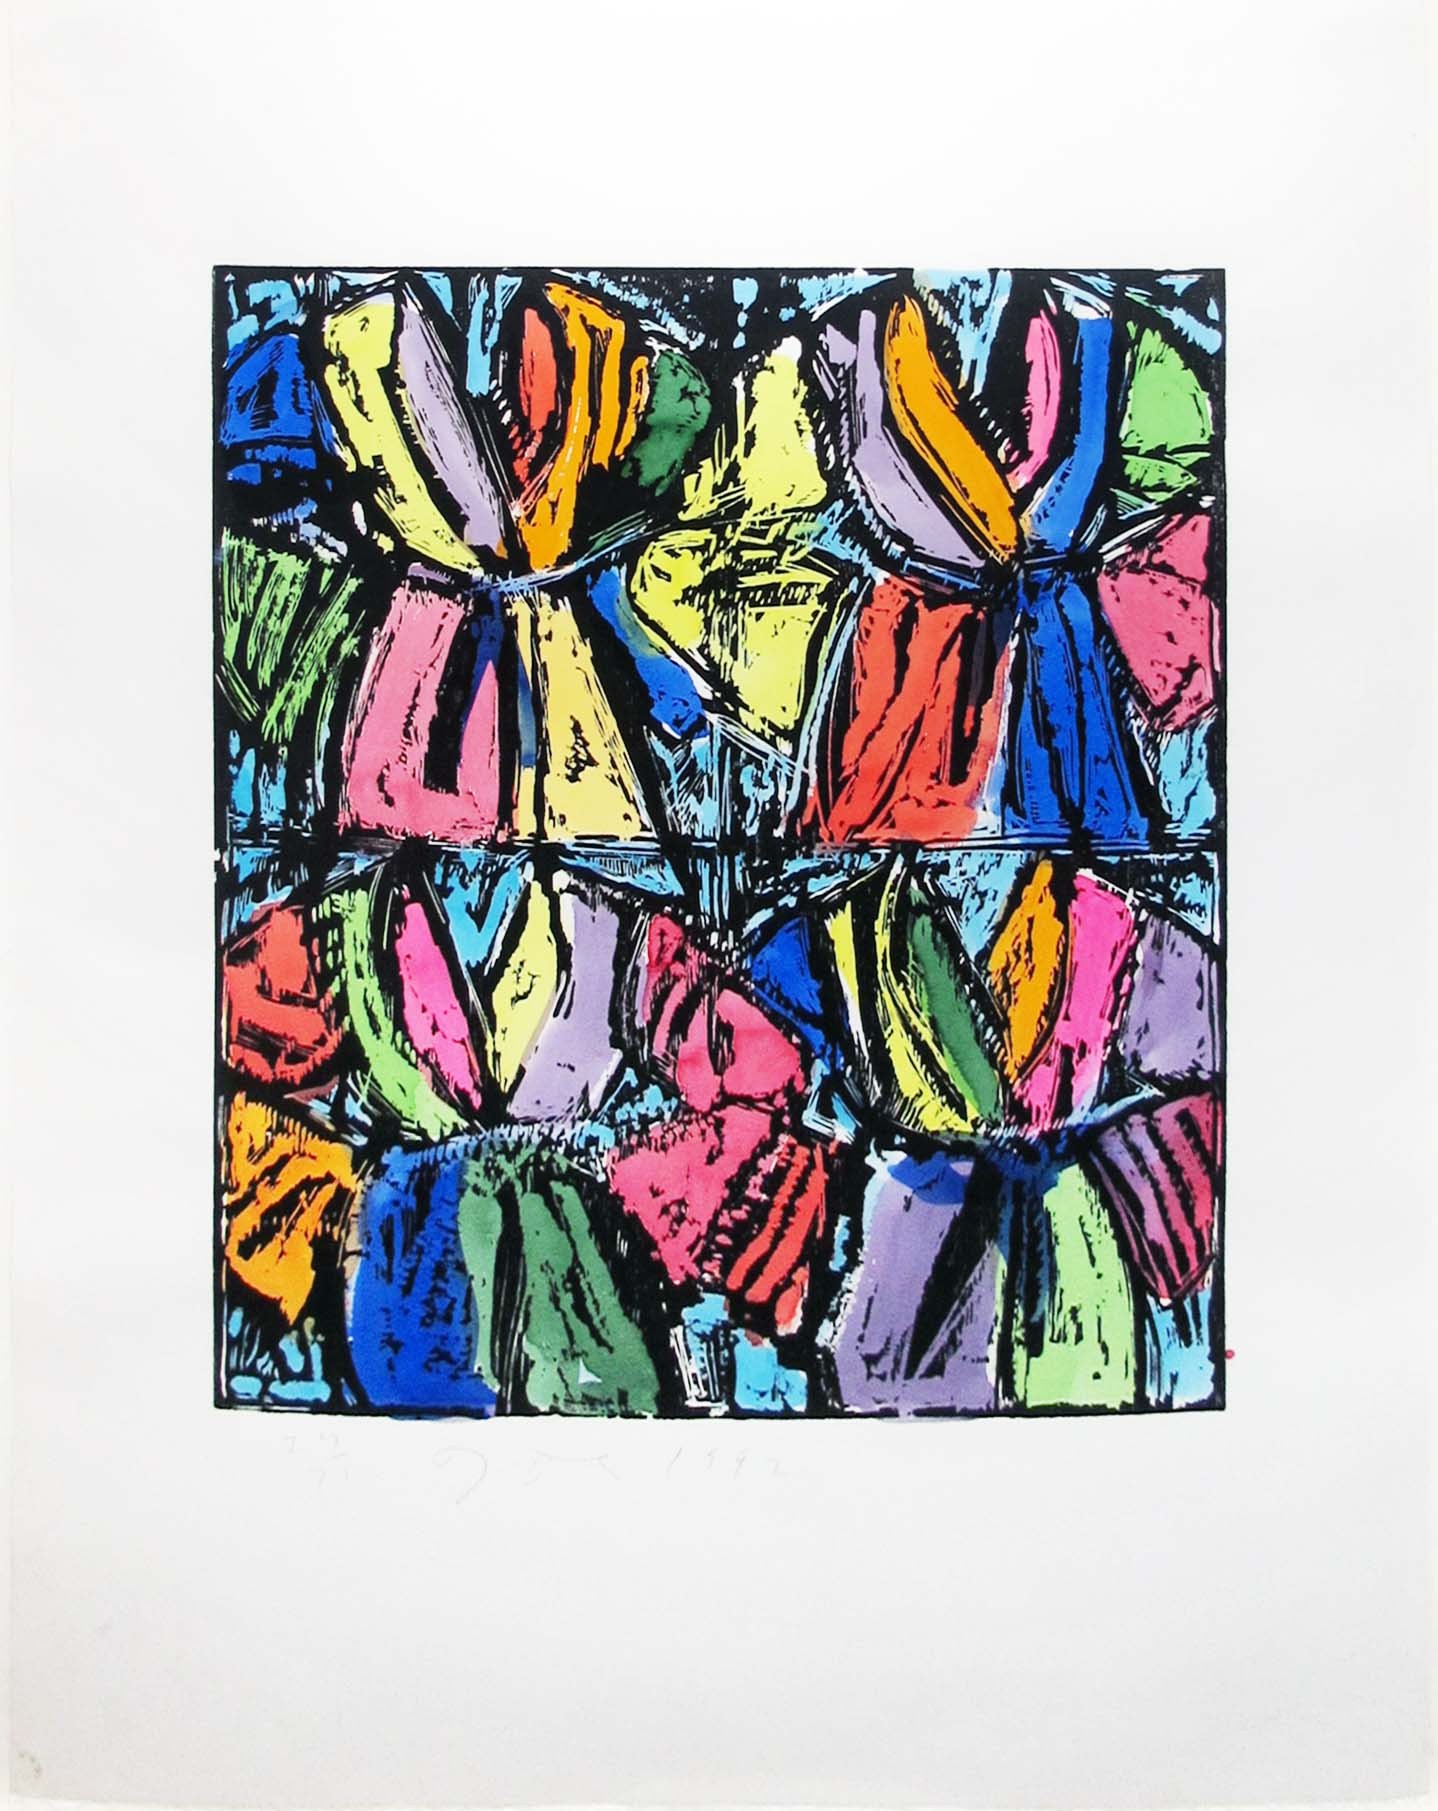 Jim Dine | Dexter’s Four Robes | 1992 | Image of Artists' work.